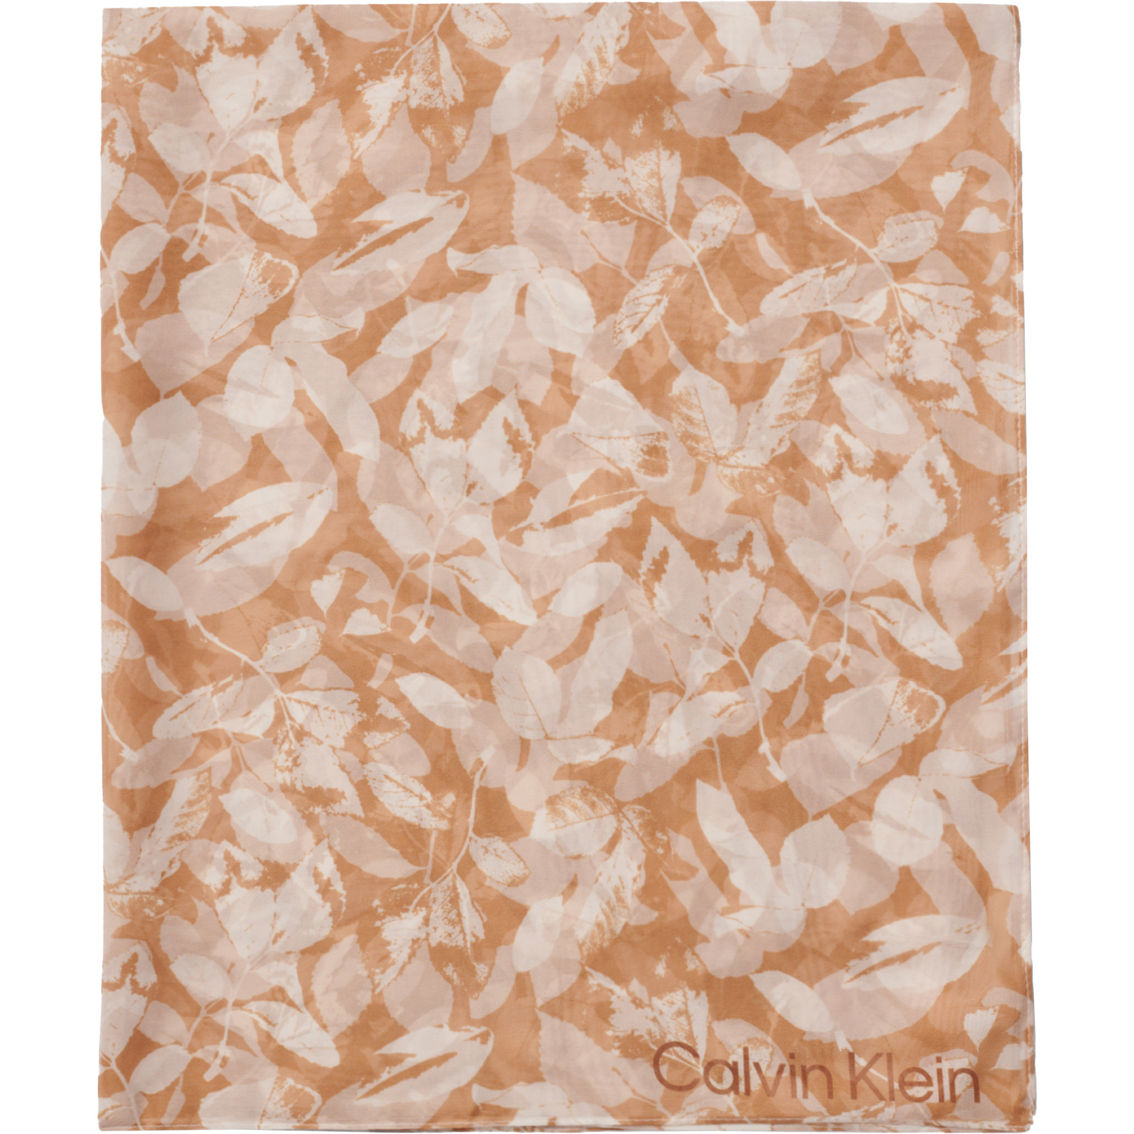 Calvin Klein Leaves Chiffon Luggage Scarf - Image 3 of 3